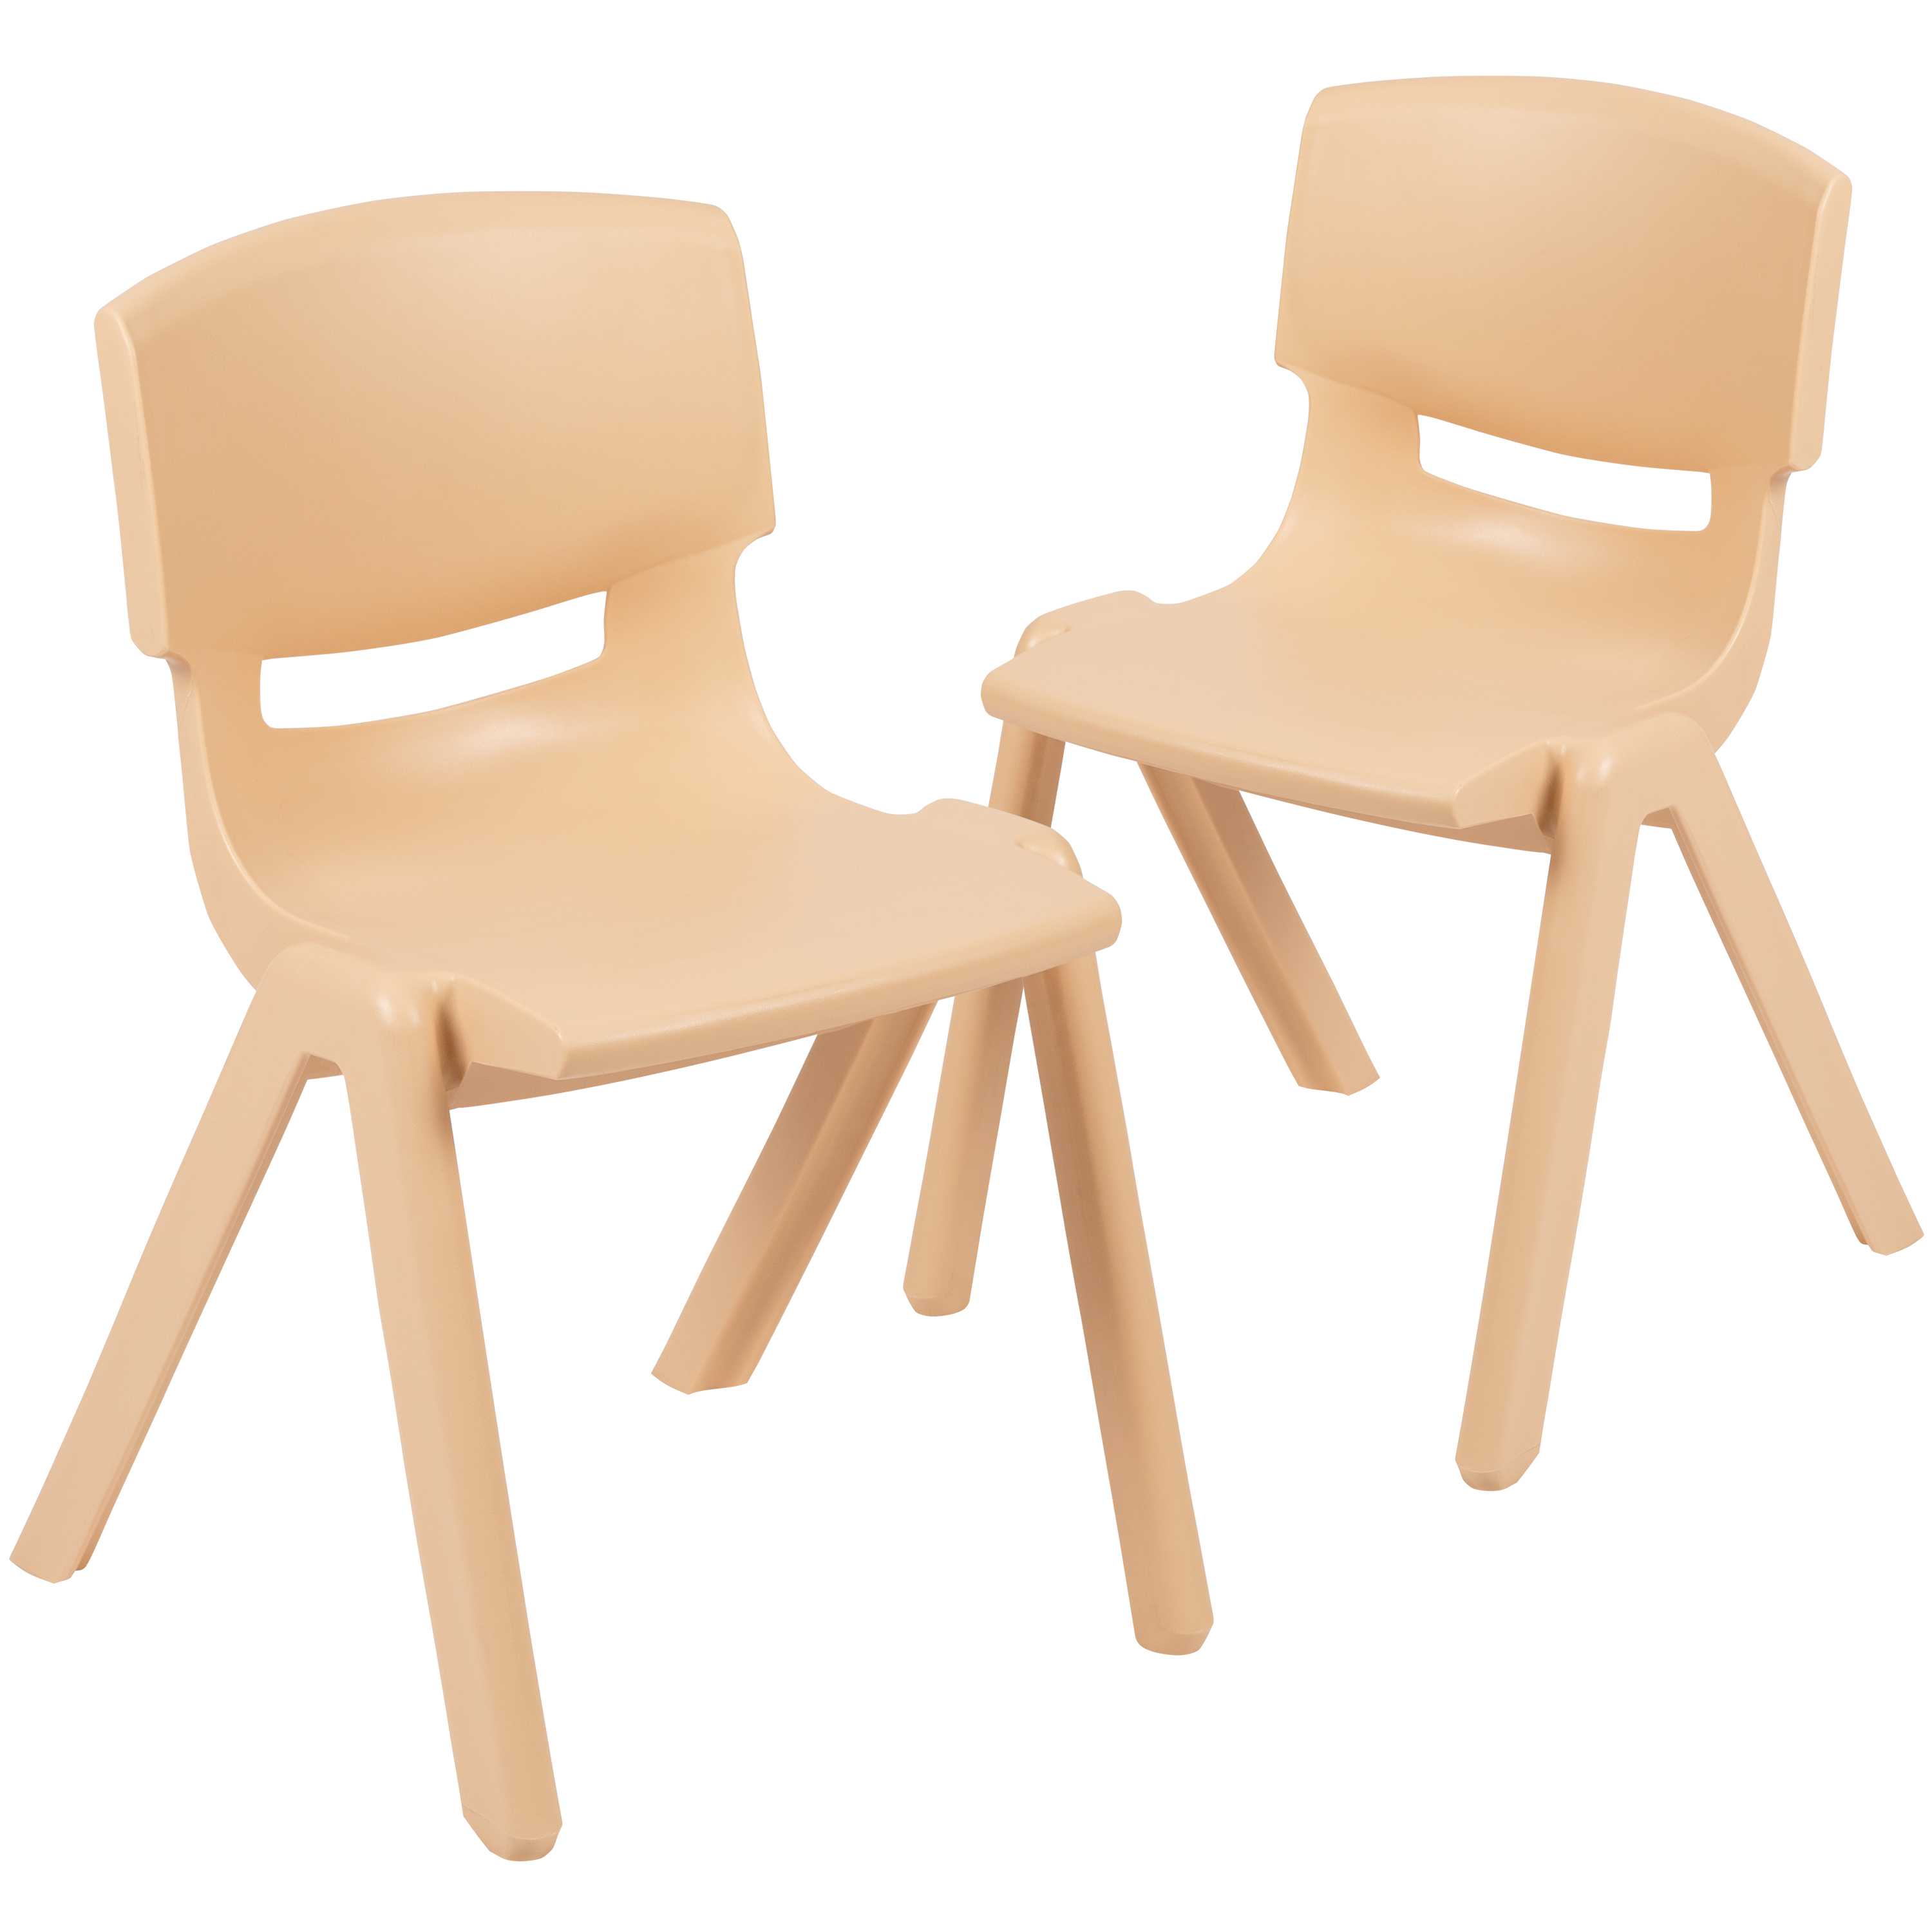 Flash Furniture 2 Pack Natural Plastic Stackable School Chair with 13.25" Seat Height - image 3 of 13